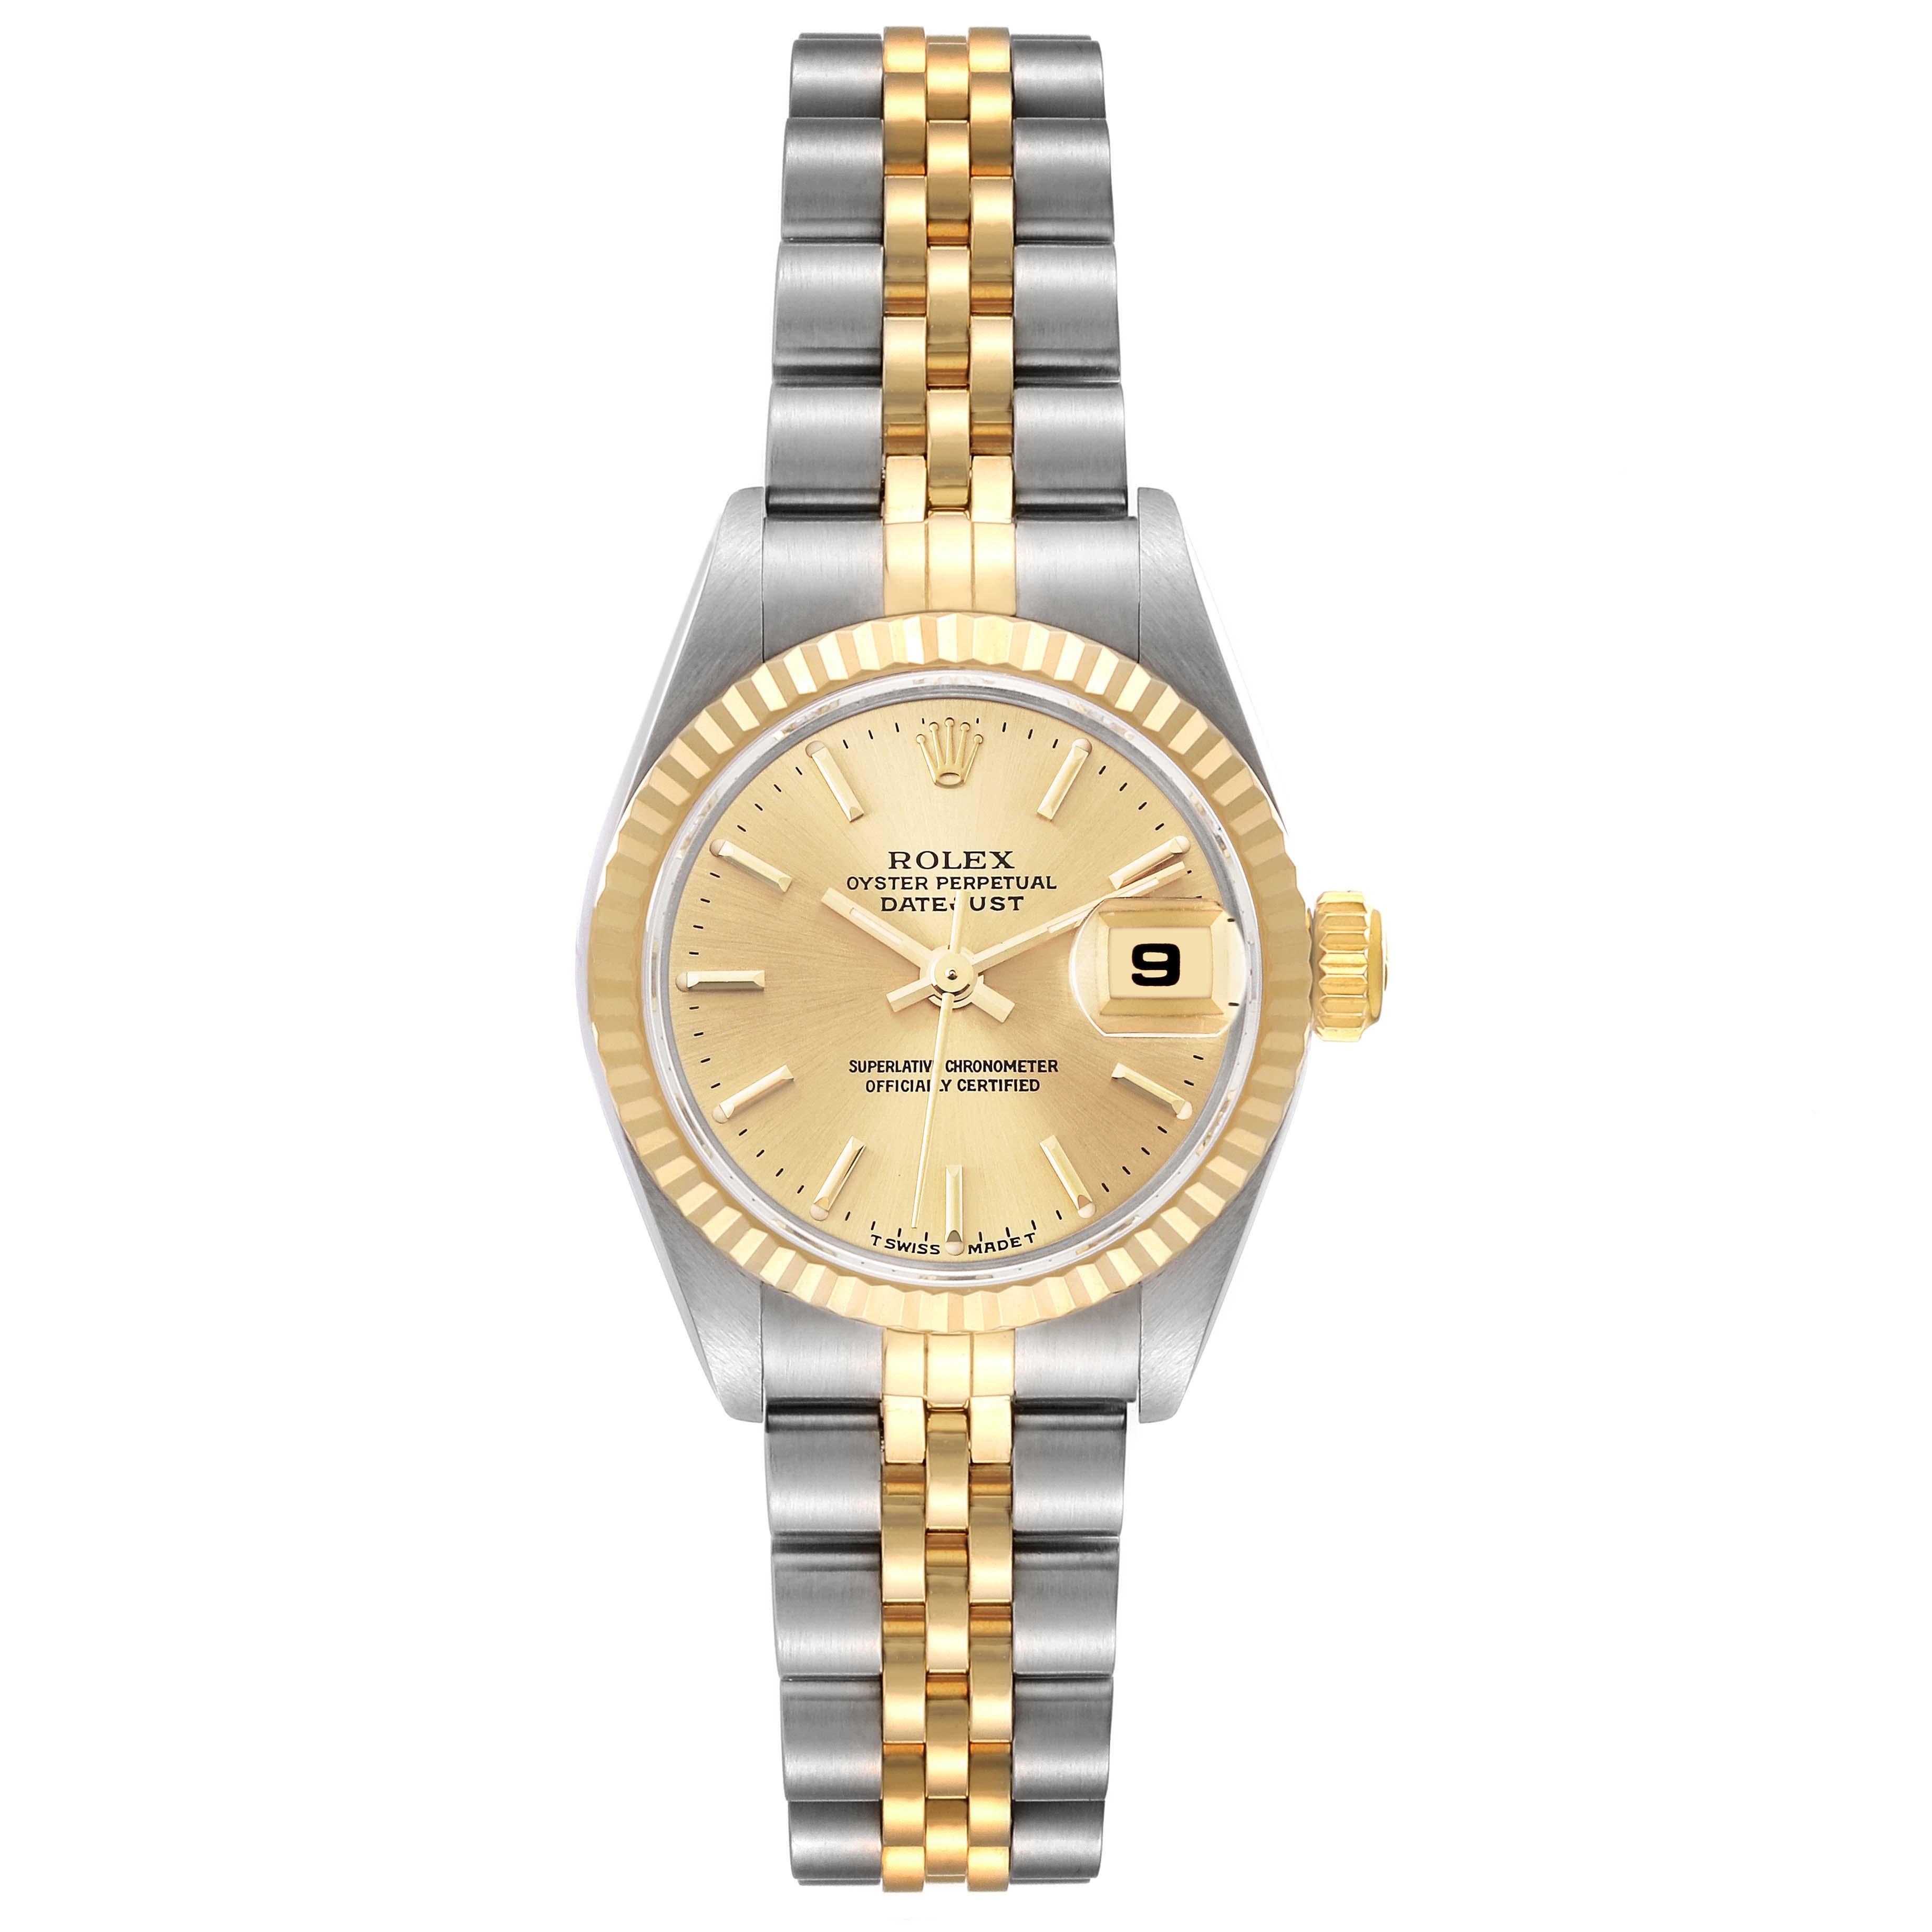 Rolex Datejust Steel Yellow Gold Champagne Dial Ladies Watch 69173. Officially certified chronometer automatic self-winding movement. Stainless steel oyster case 26.0 mm in diameter. Rolex logo on the crown. 18k yellow gold fluted bezel. Scratch